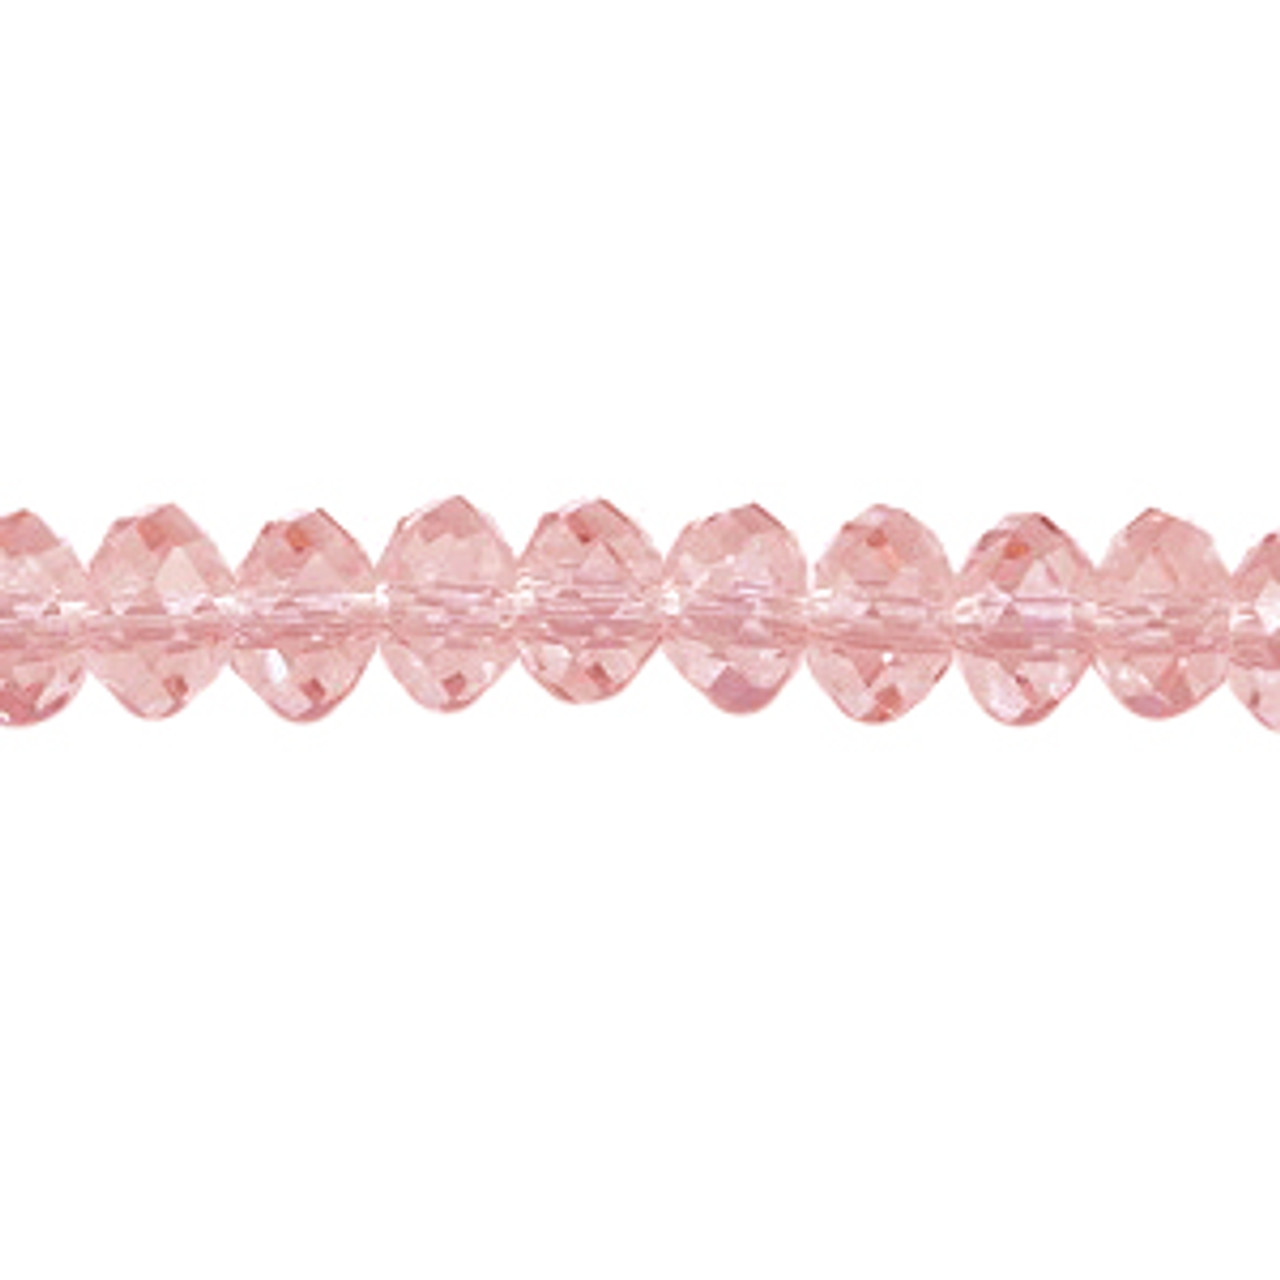 3X2mm Light Peach Faceted Roundel (Aprrox 150 Beads) #14